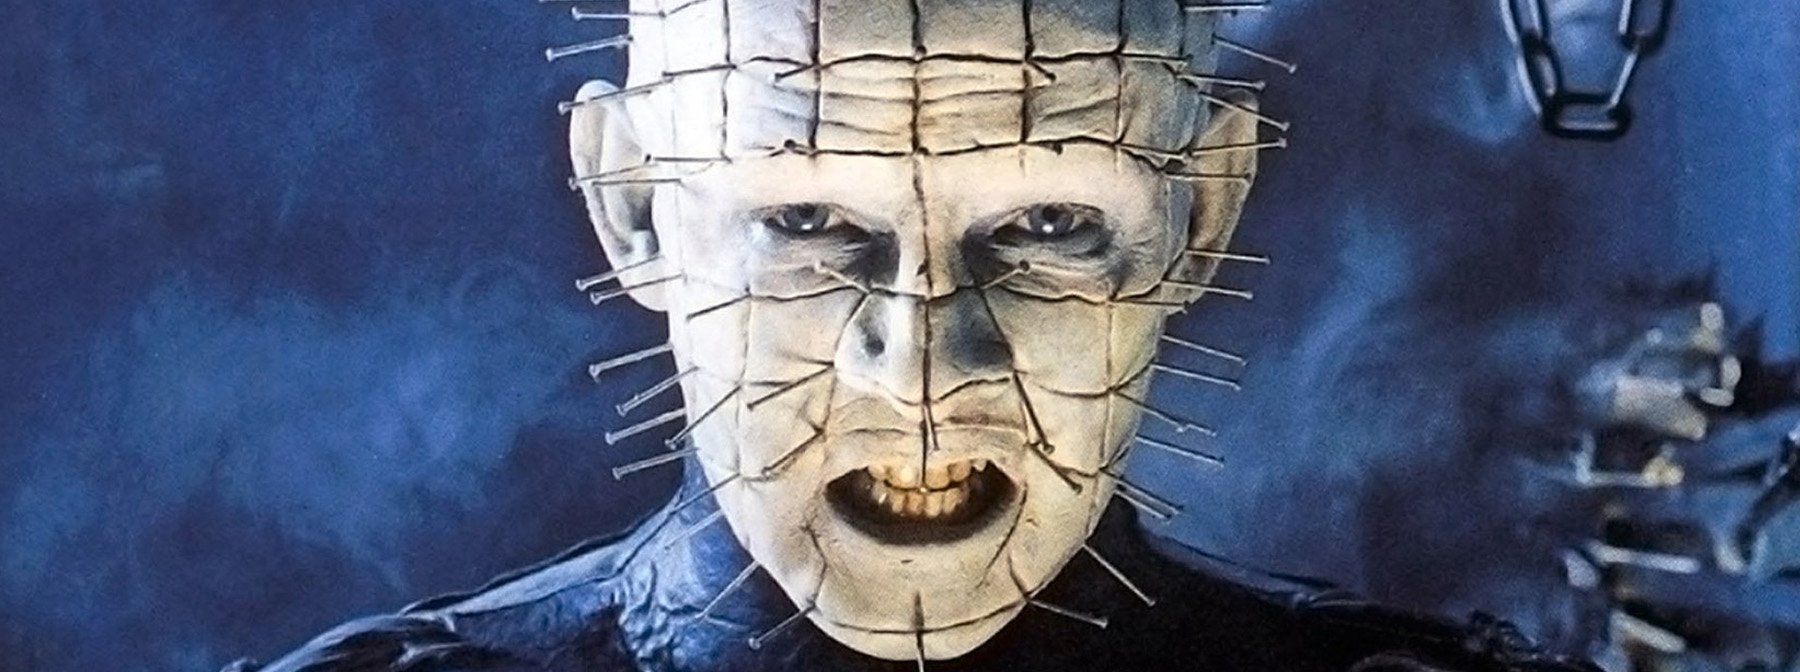 Ten Circles of Hell: Raising the best of Clive Barker on film